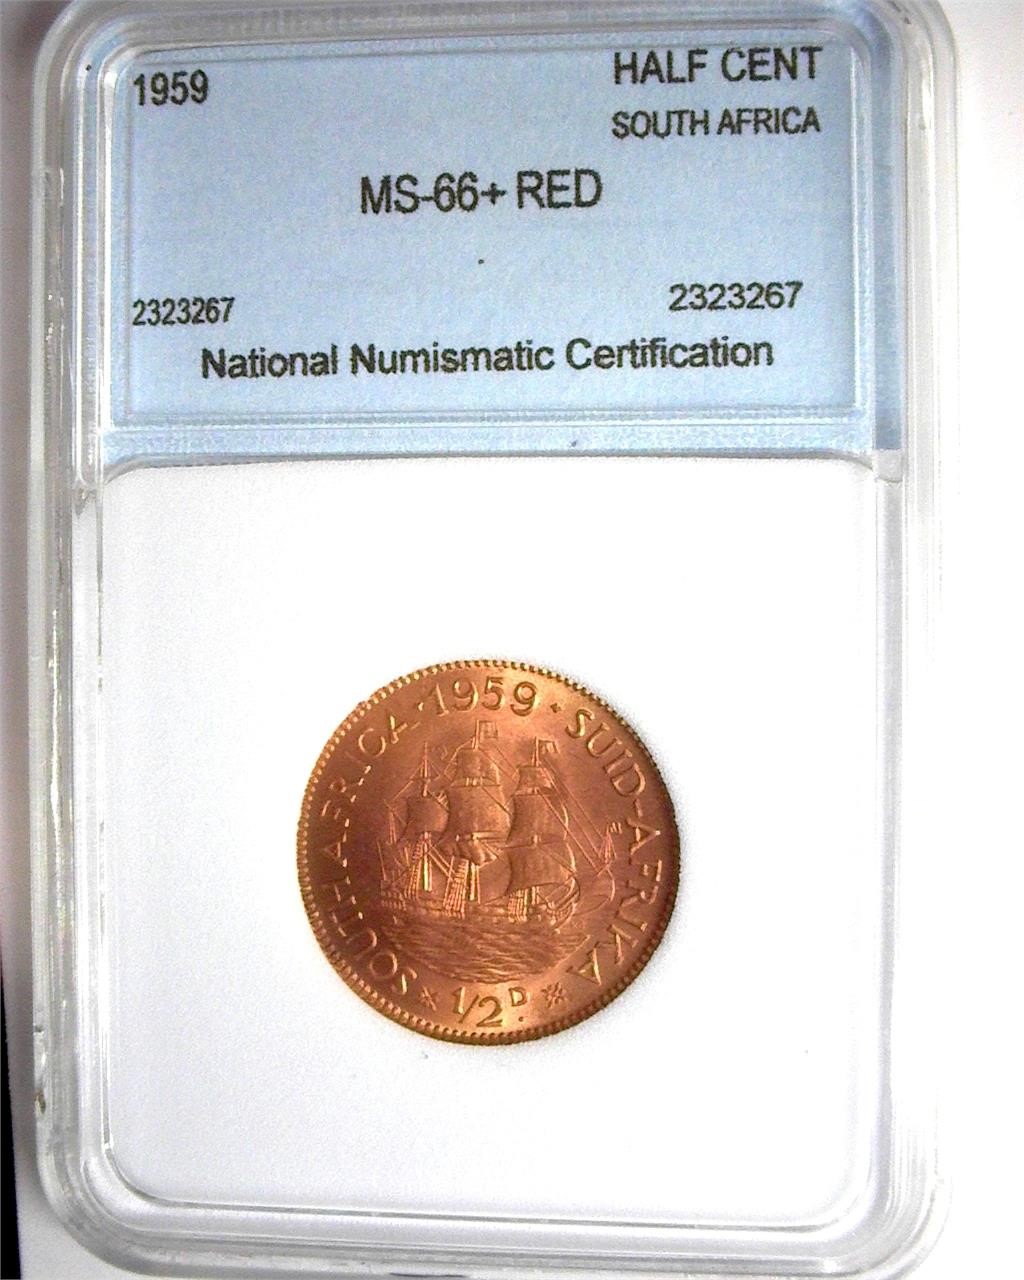 1959 Half Cent NNC MS66+ RD South Africa